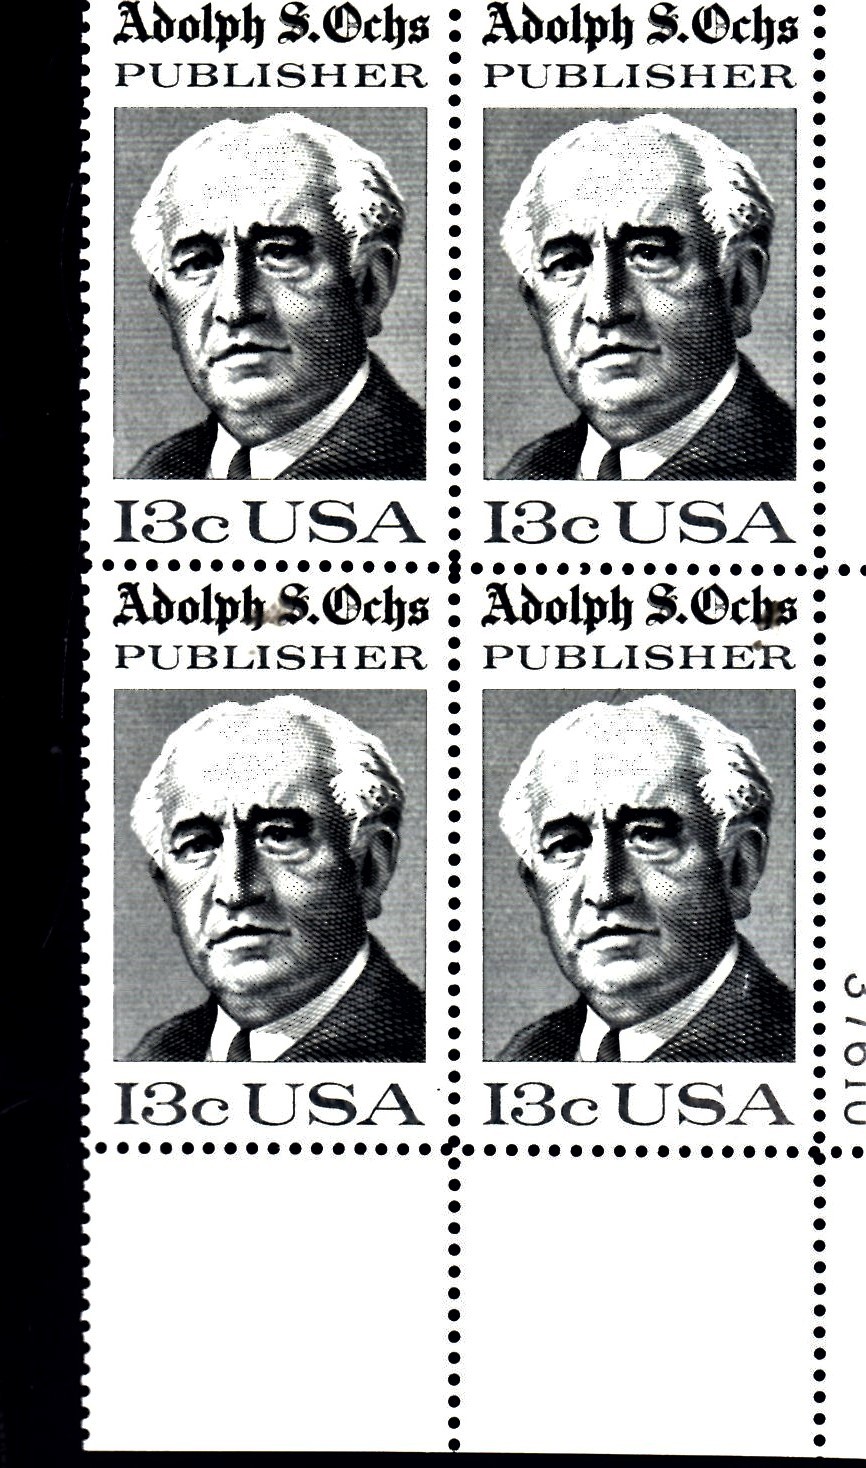 Primary image for U S Stamps - Adolph S. Ochs, Publisher 1976 - Plate Block